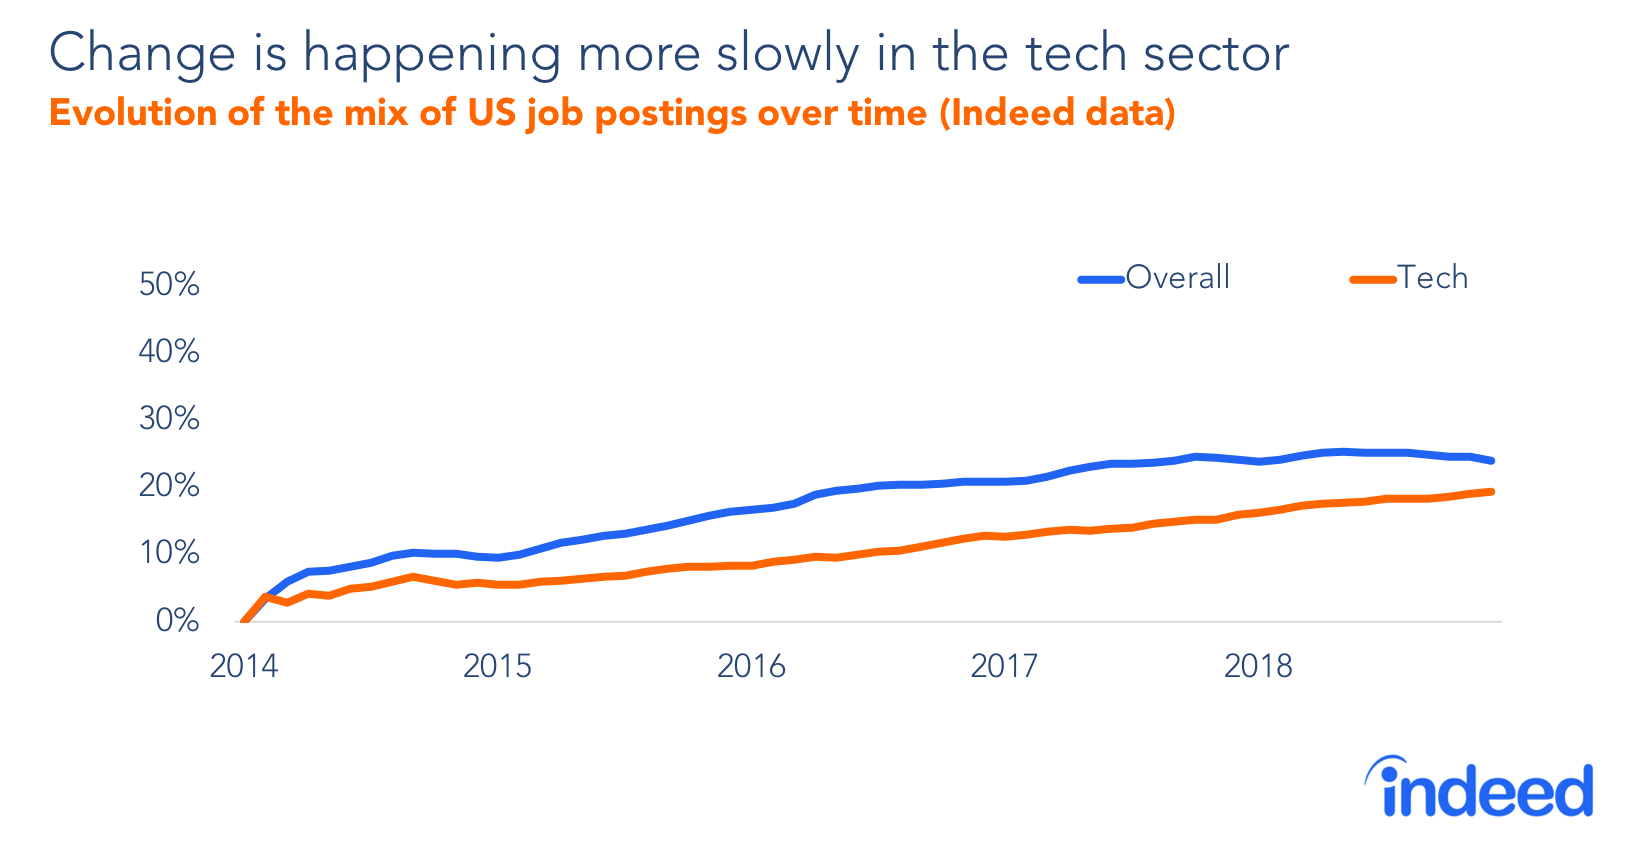 Change is happening more slowly in the tech sector